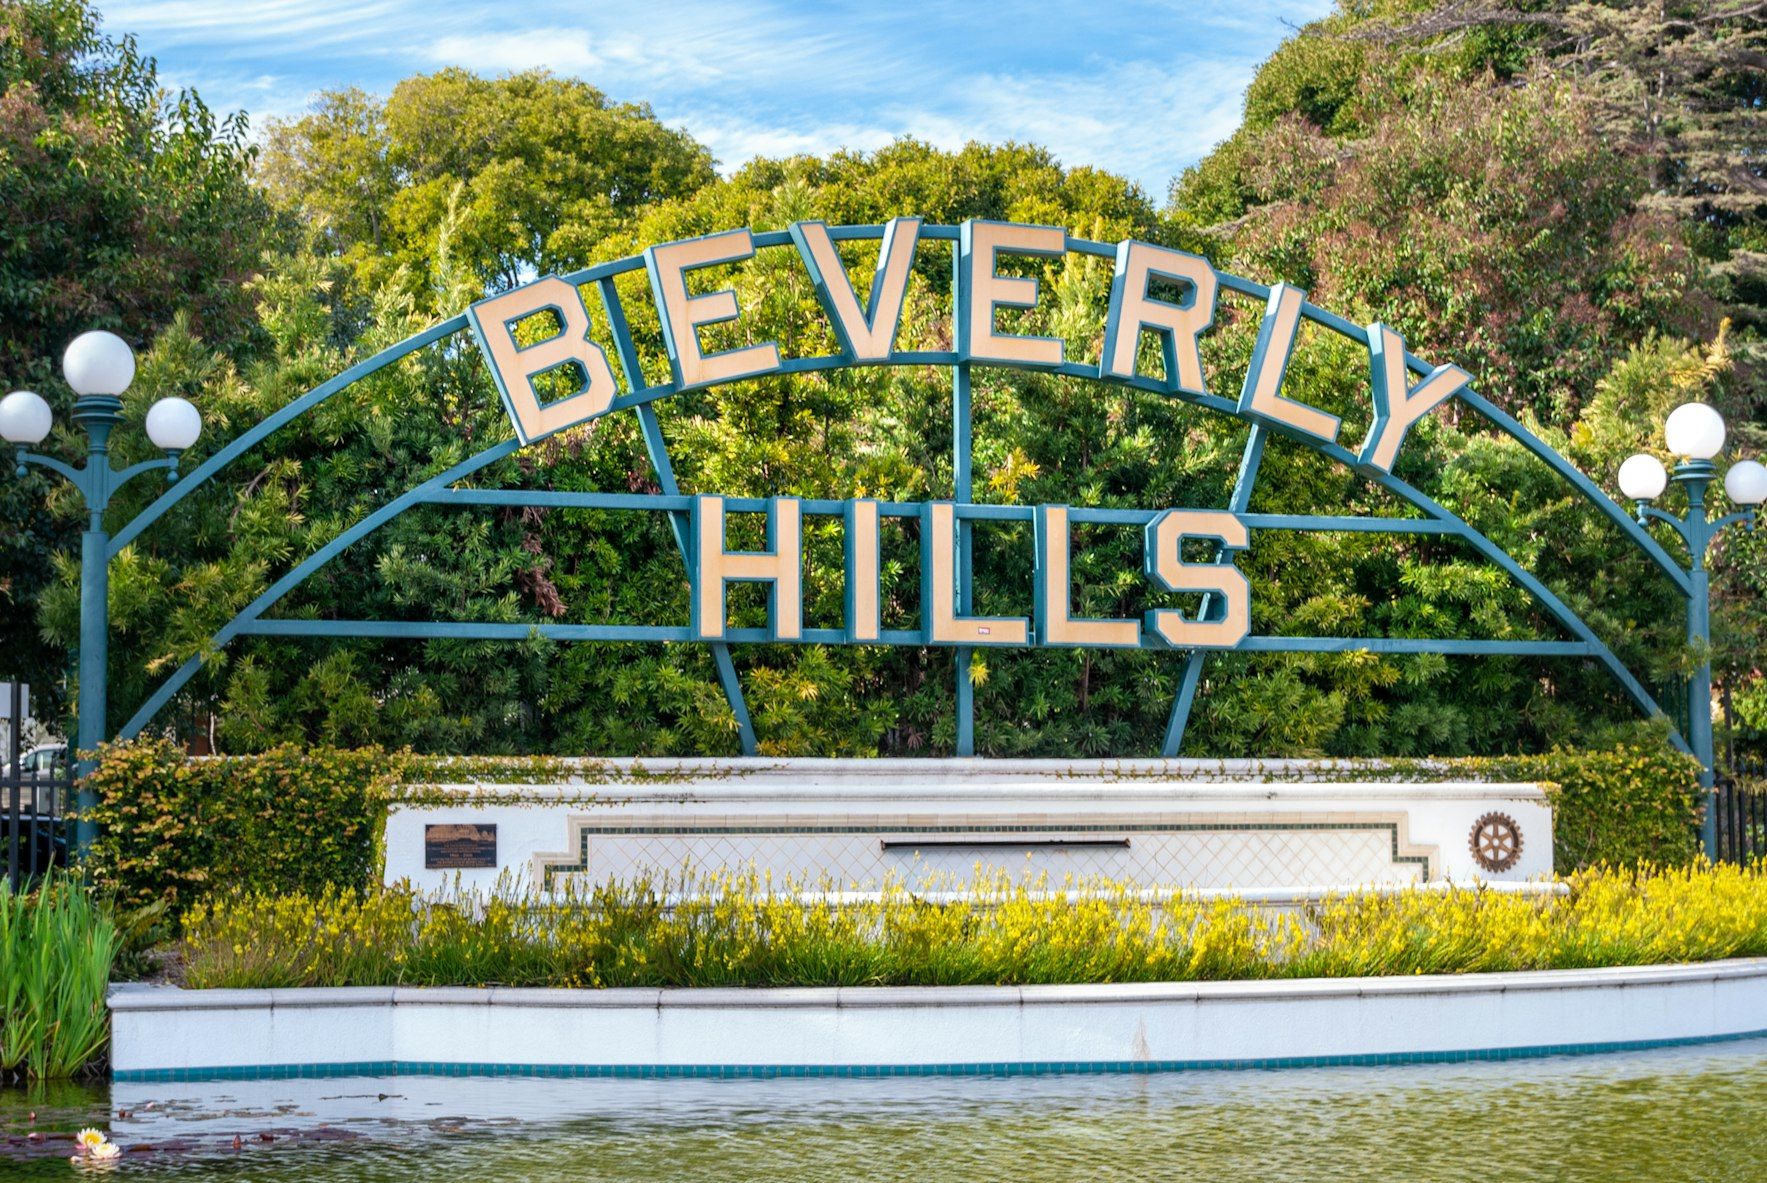 beverly hills 72 hours in los angeles